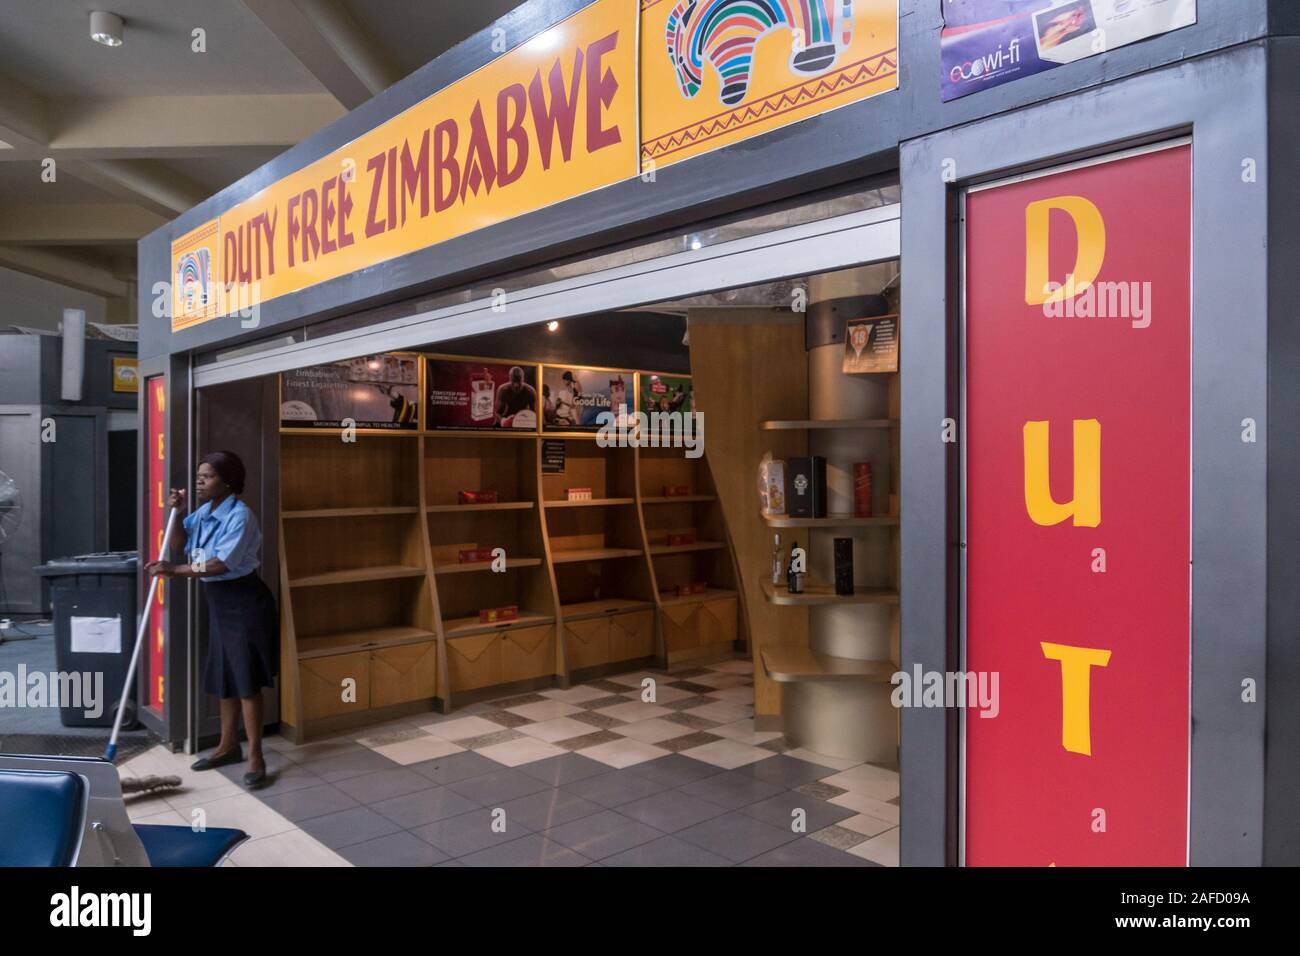 Robert Mugabe International Airport, Harare, Zimbabwe. An almost empty Duty free shop during the economic crisis of late 2019. Stock Photo